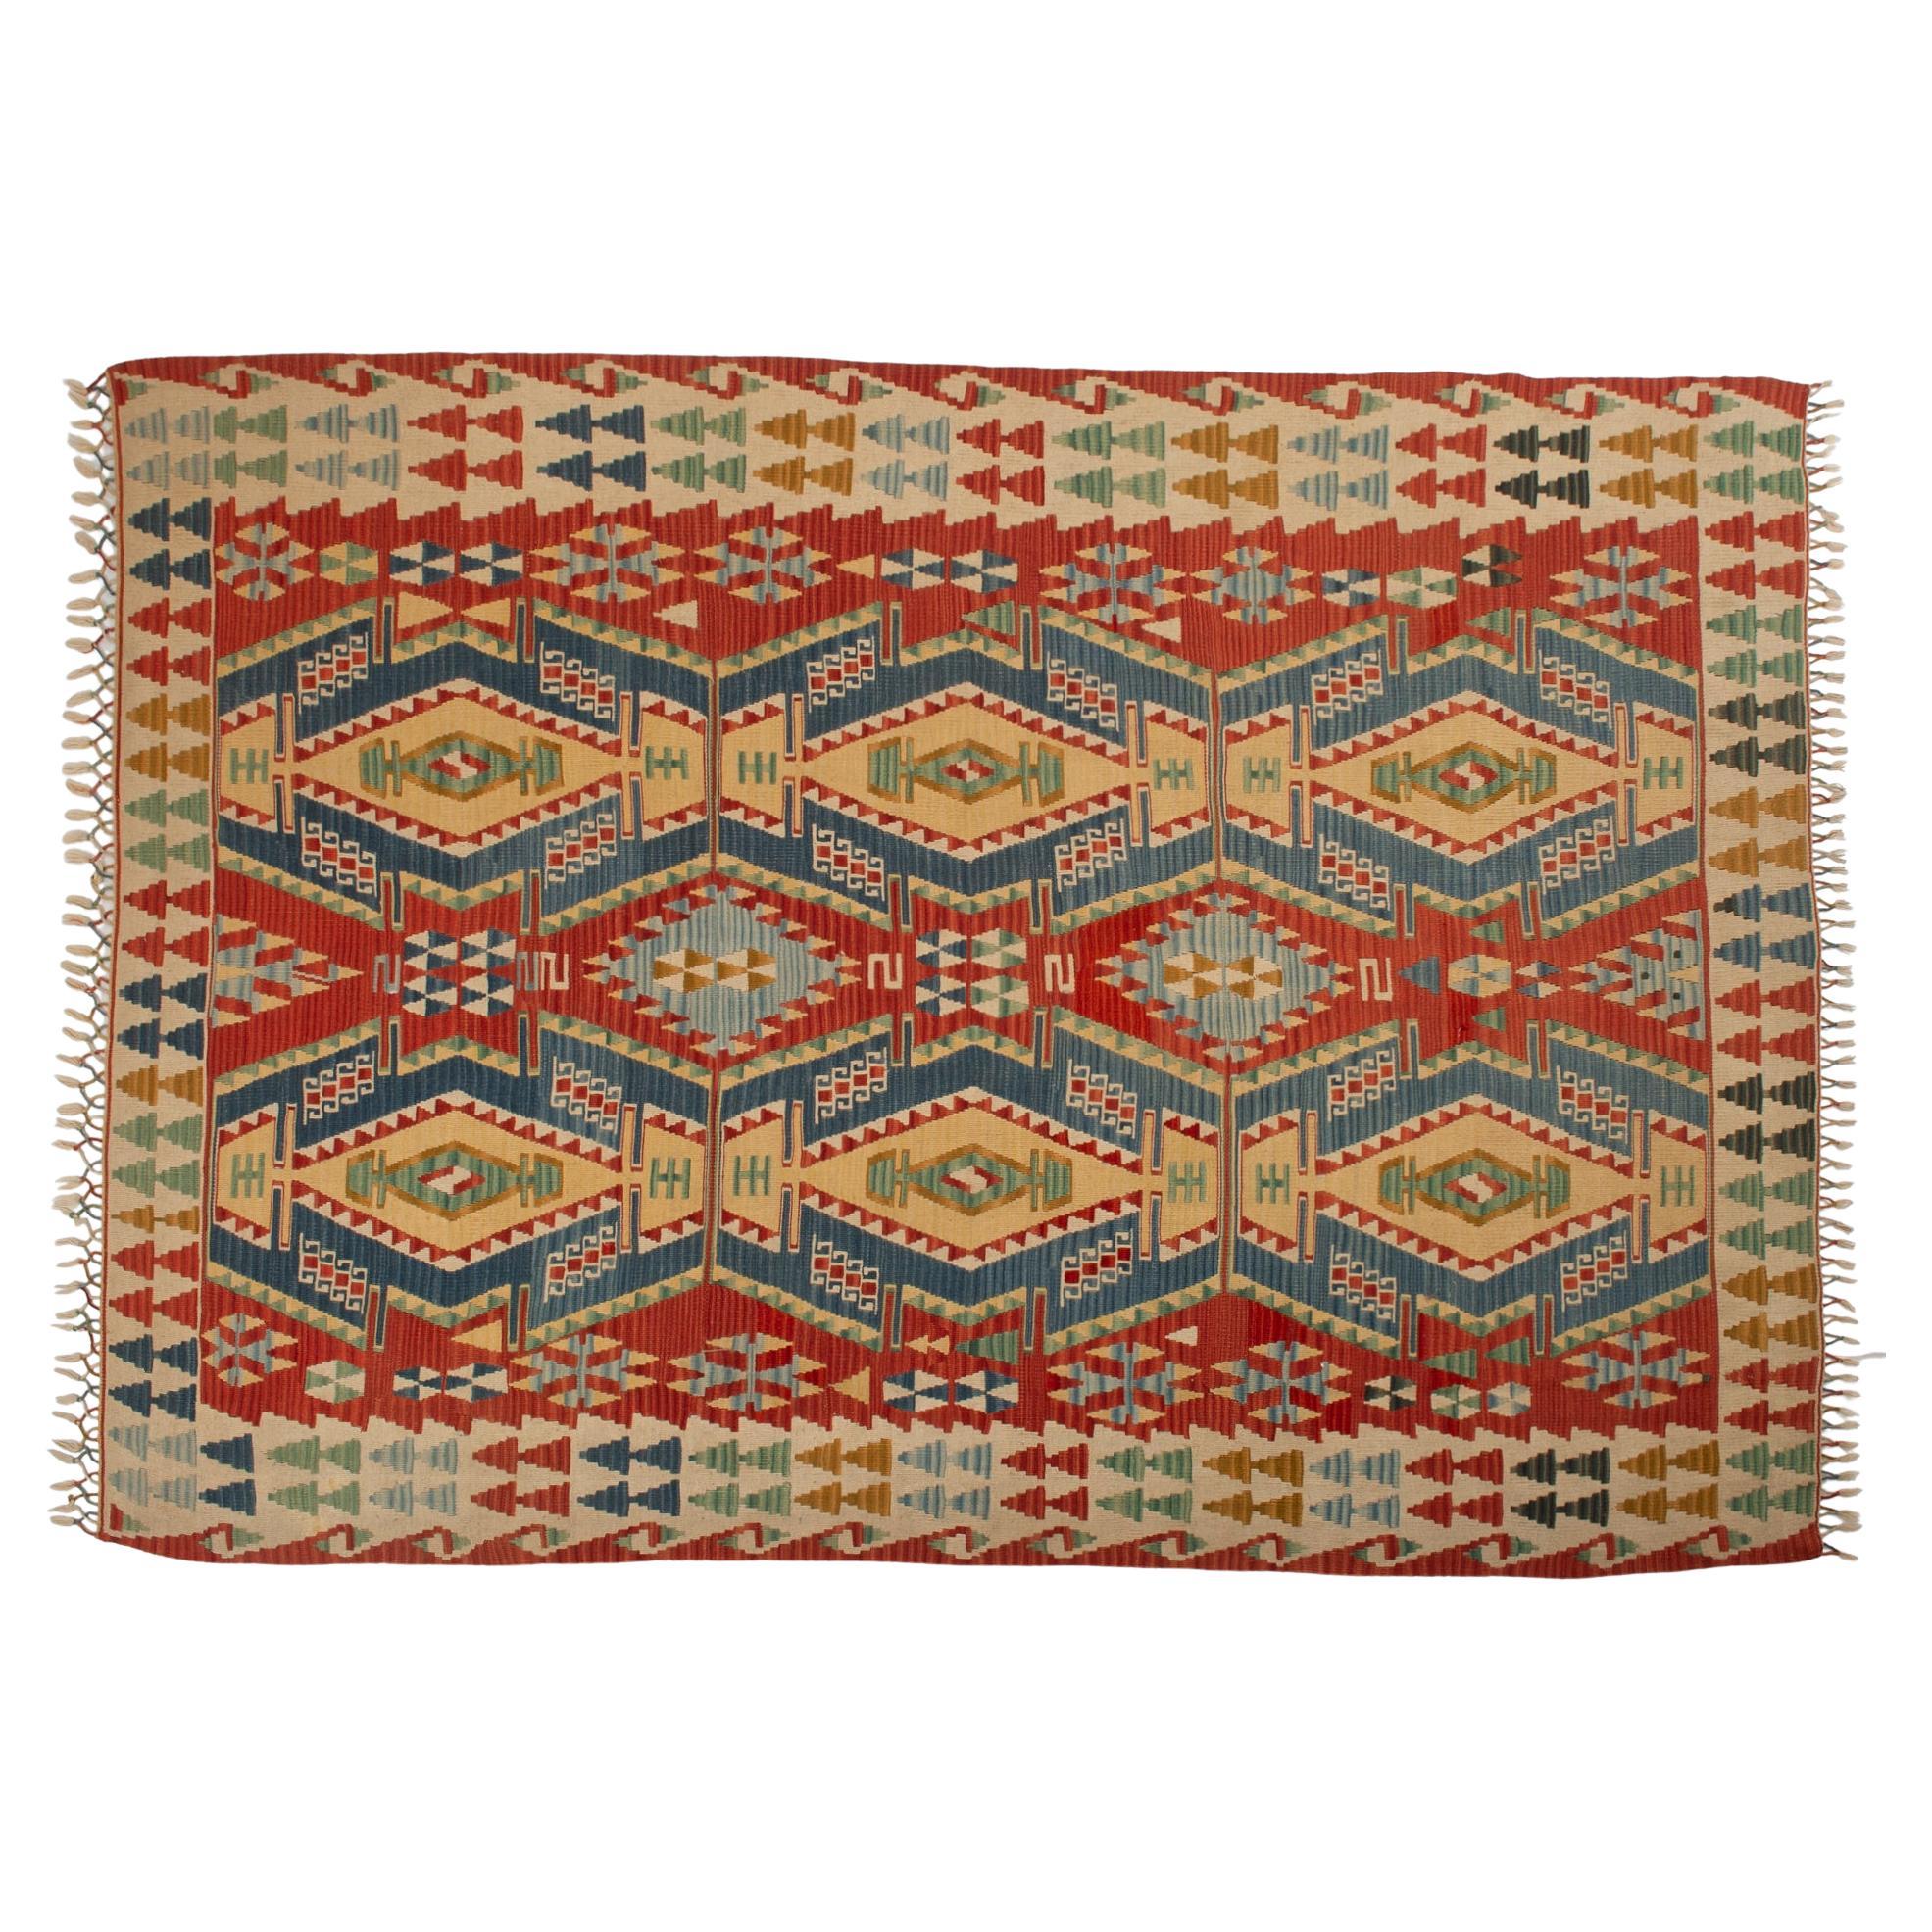 nr. 1009 - The classic cheerful Turkish kilim: where environments bring joy. It was a job for girls in the town Keissary, the antique Roman Cesarea, but not anymore.
Best price now, because I want to close my activities.